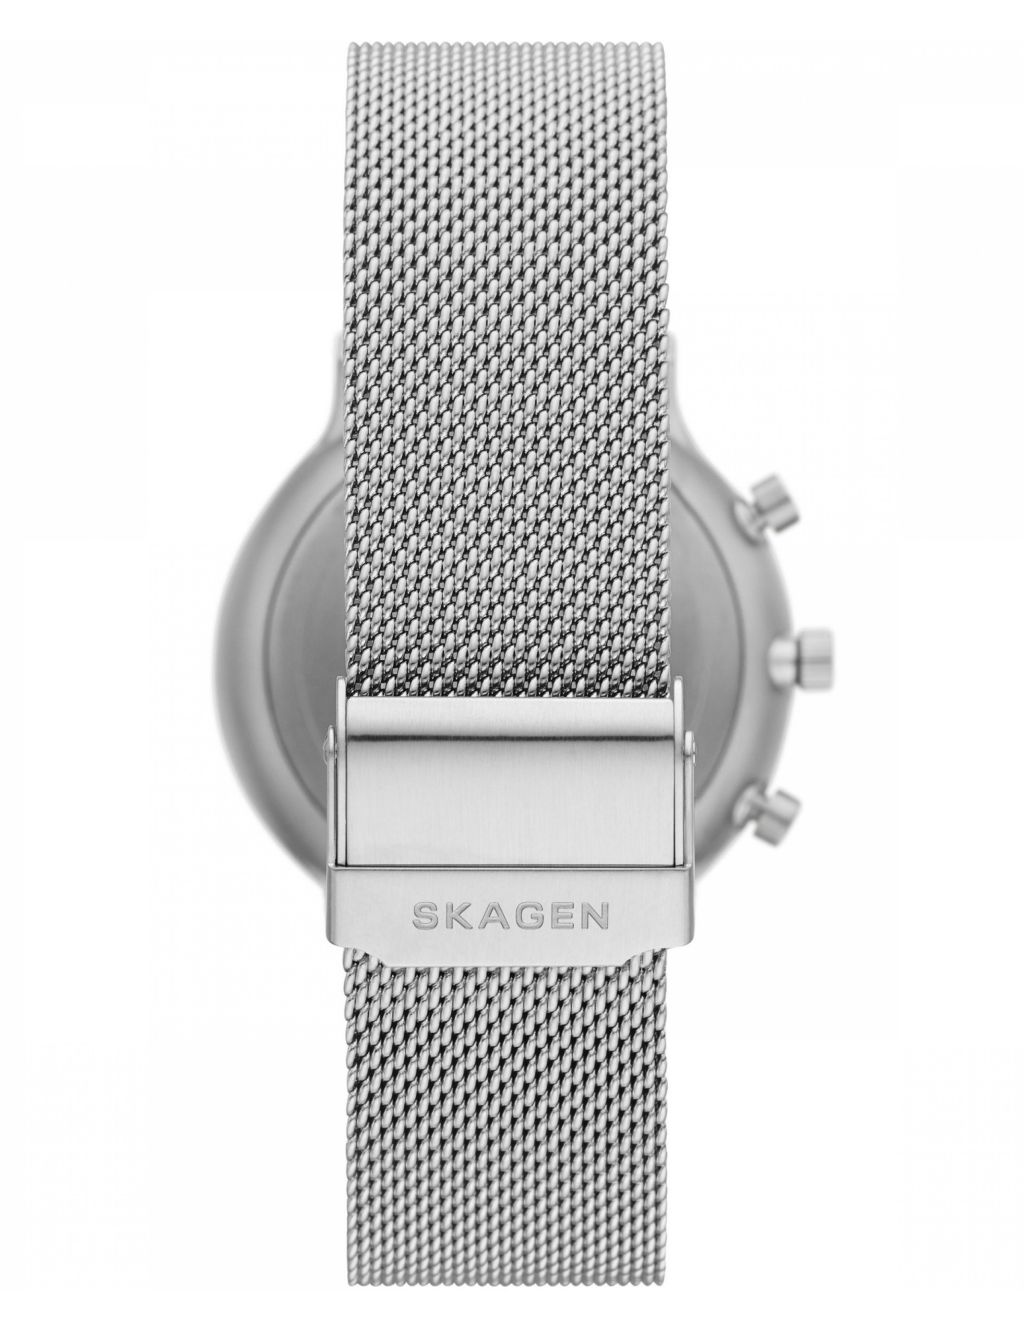 Skagen Anchor Chronograph Silver Stainless Steel Watch image 3